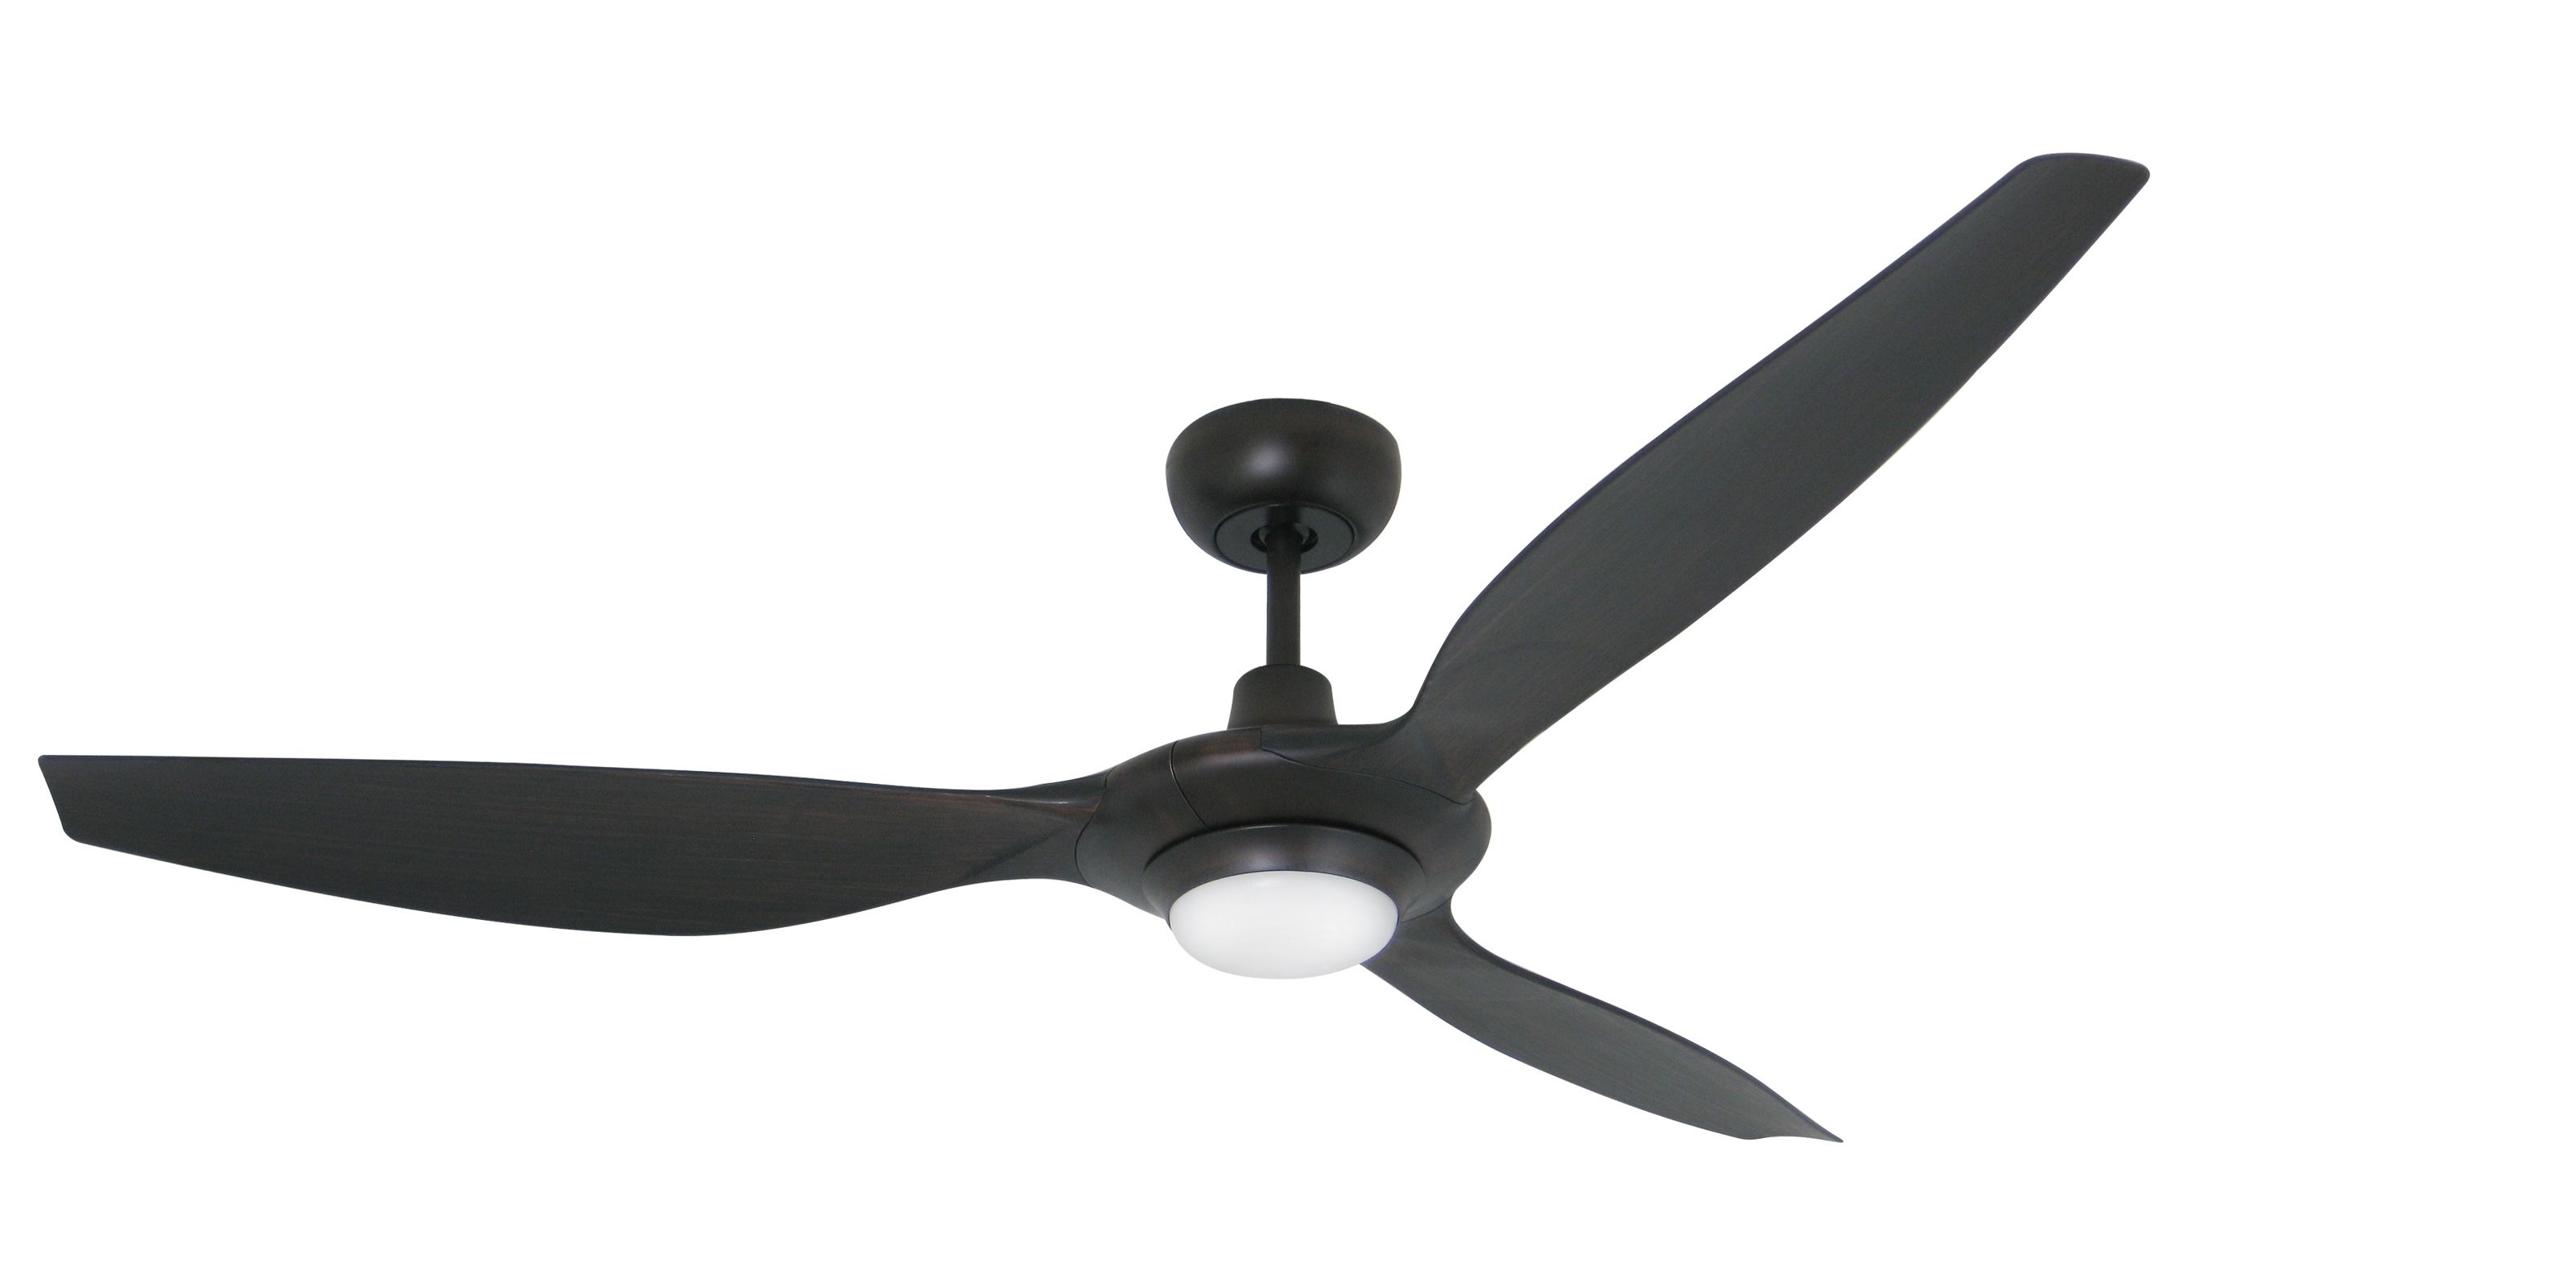 2018 Outdoor Ceiling Fans With Dc Motors With Troposair Vogue Plus 60" Oil Rubbed Bronze Dc Motor Ceiling Fan With (View 1 of 20)